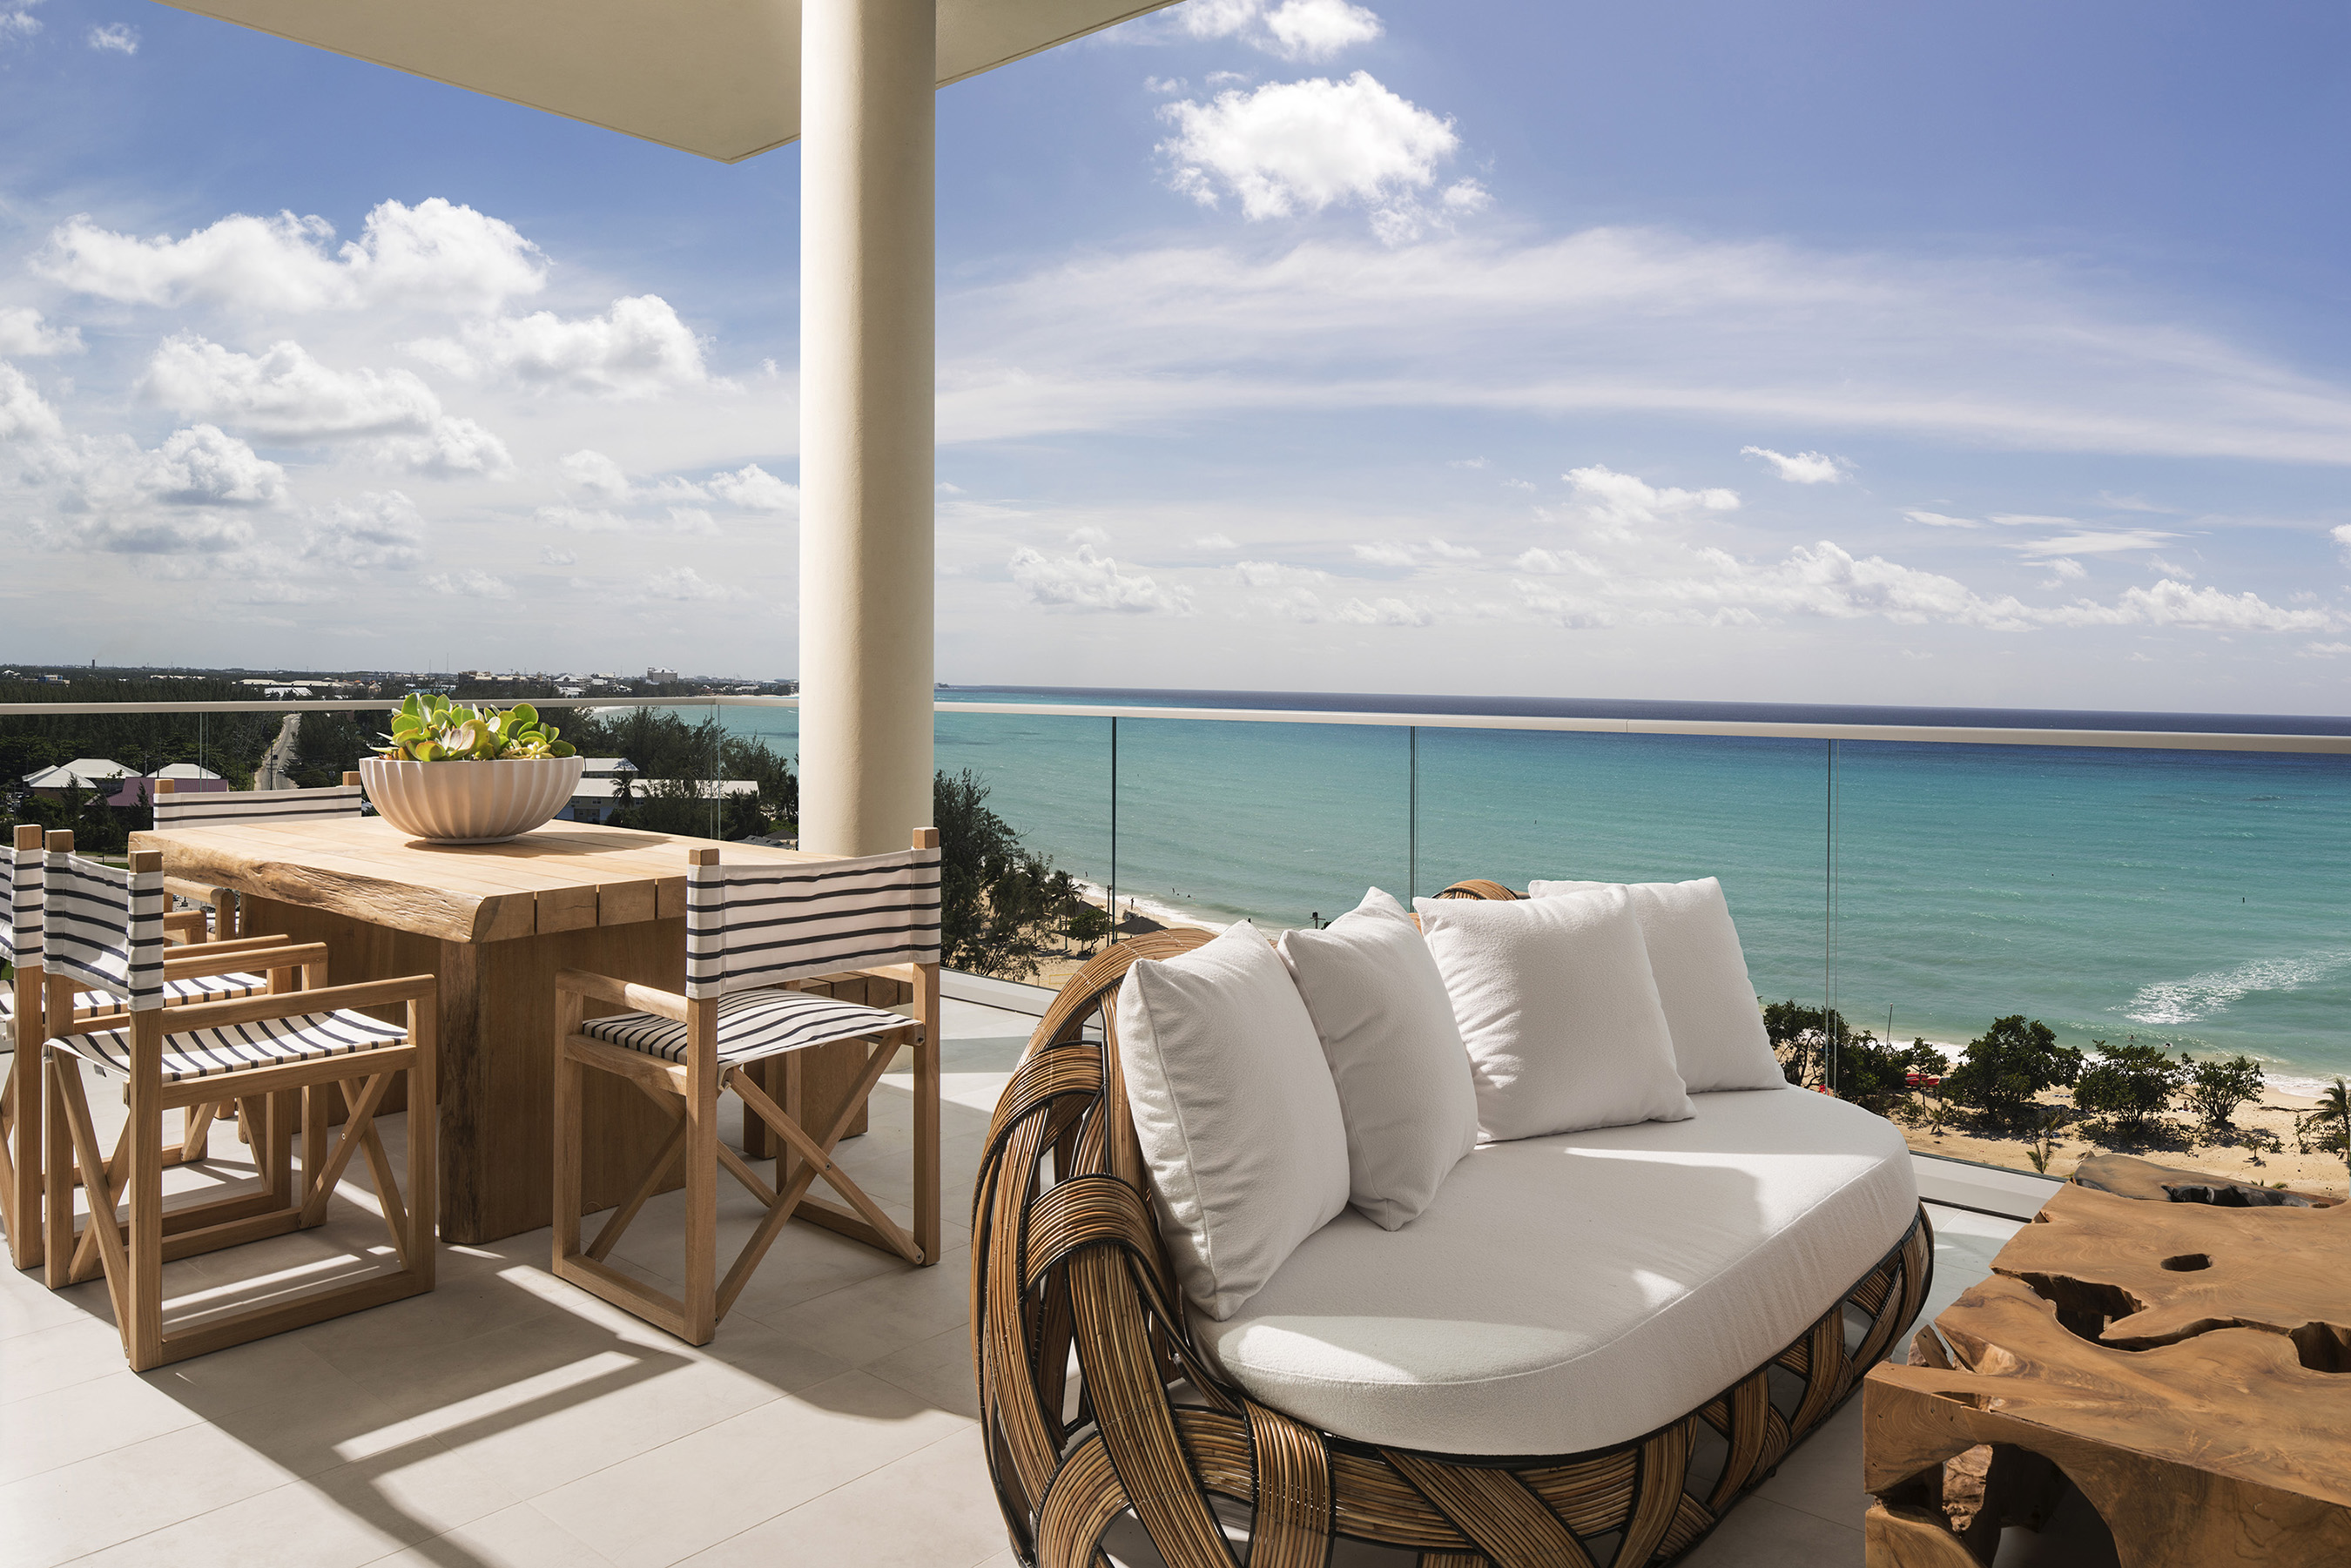 View from the private balcony of a unit at the newly opened Residences at Seafire in Grand Cayman